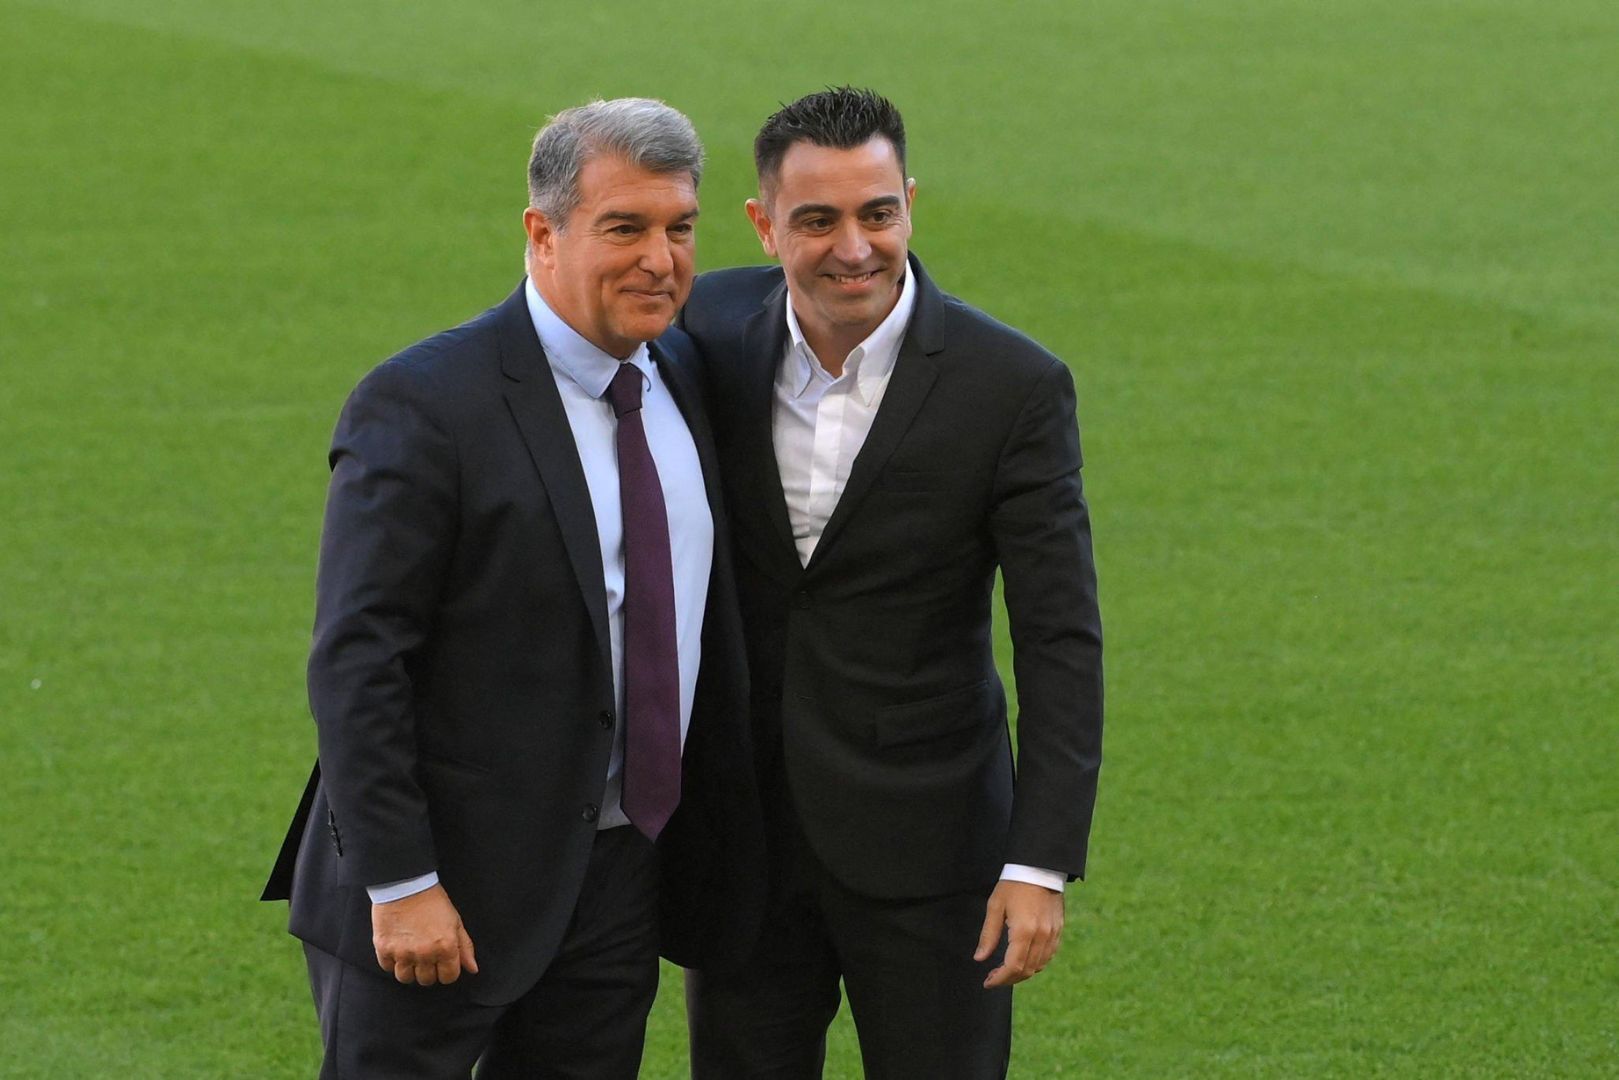 Newly-appointed FC Barcelona's Spanish coach Xavi Hernandez (R) poses with FC Barcelona's Spanish president Joan Laporta during his presentation ceremony at the Camp Nou stadium in Barcelona on November 8, 2021.